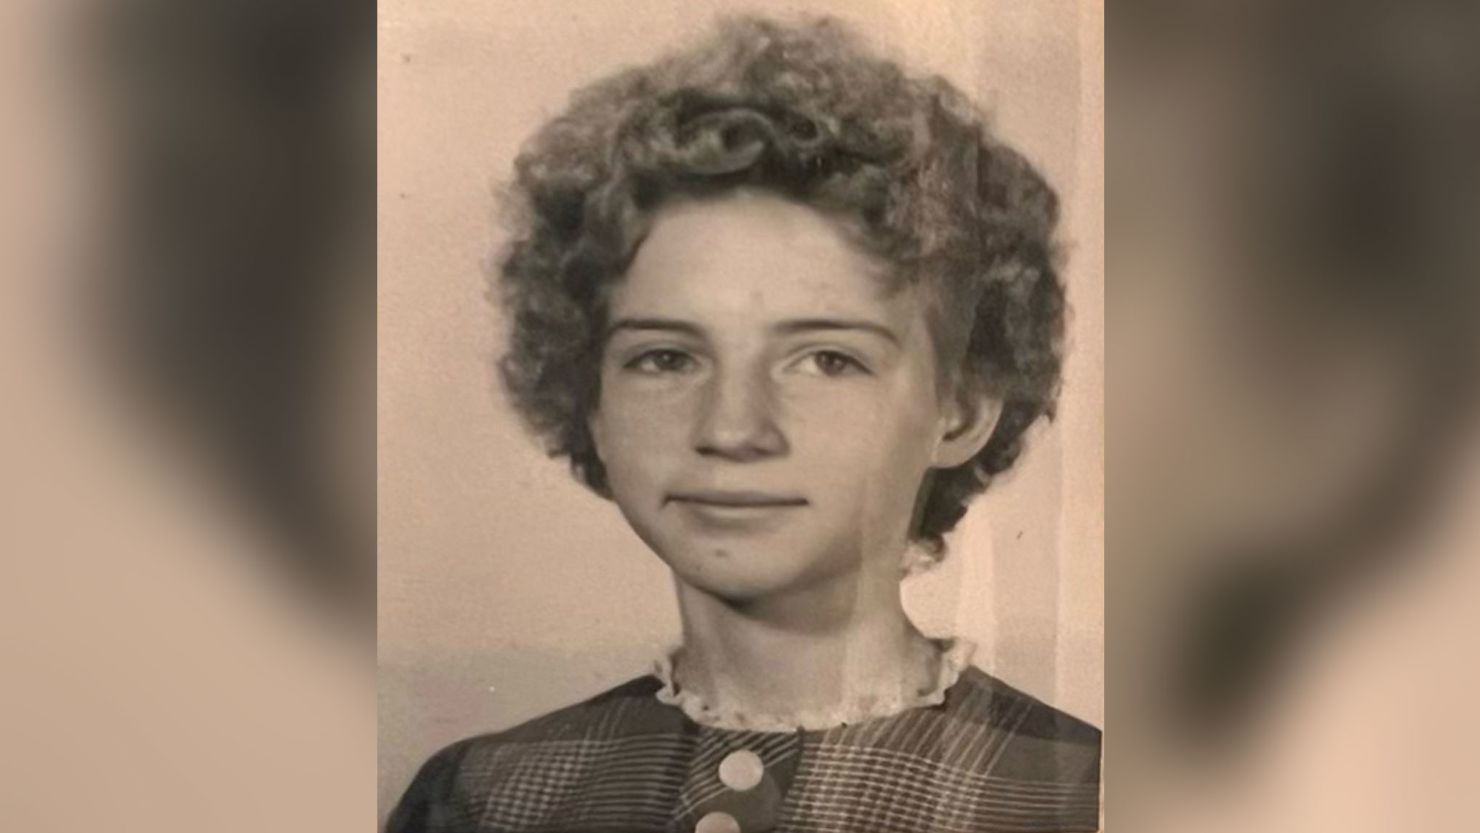 Connecticut State Police have identified the female victim of a double homicide that occurred on December 31, 1970, as Linda Sue Childers.